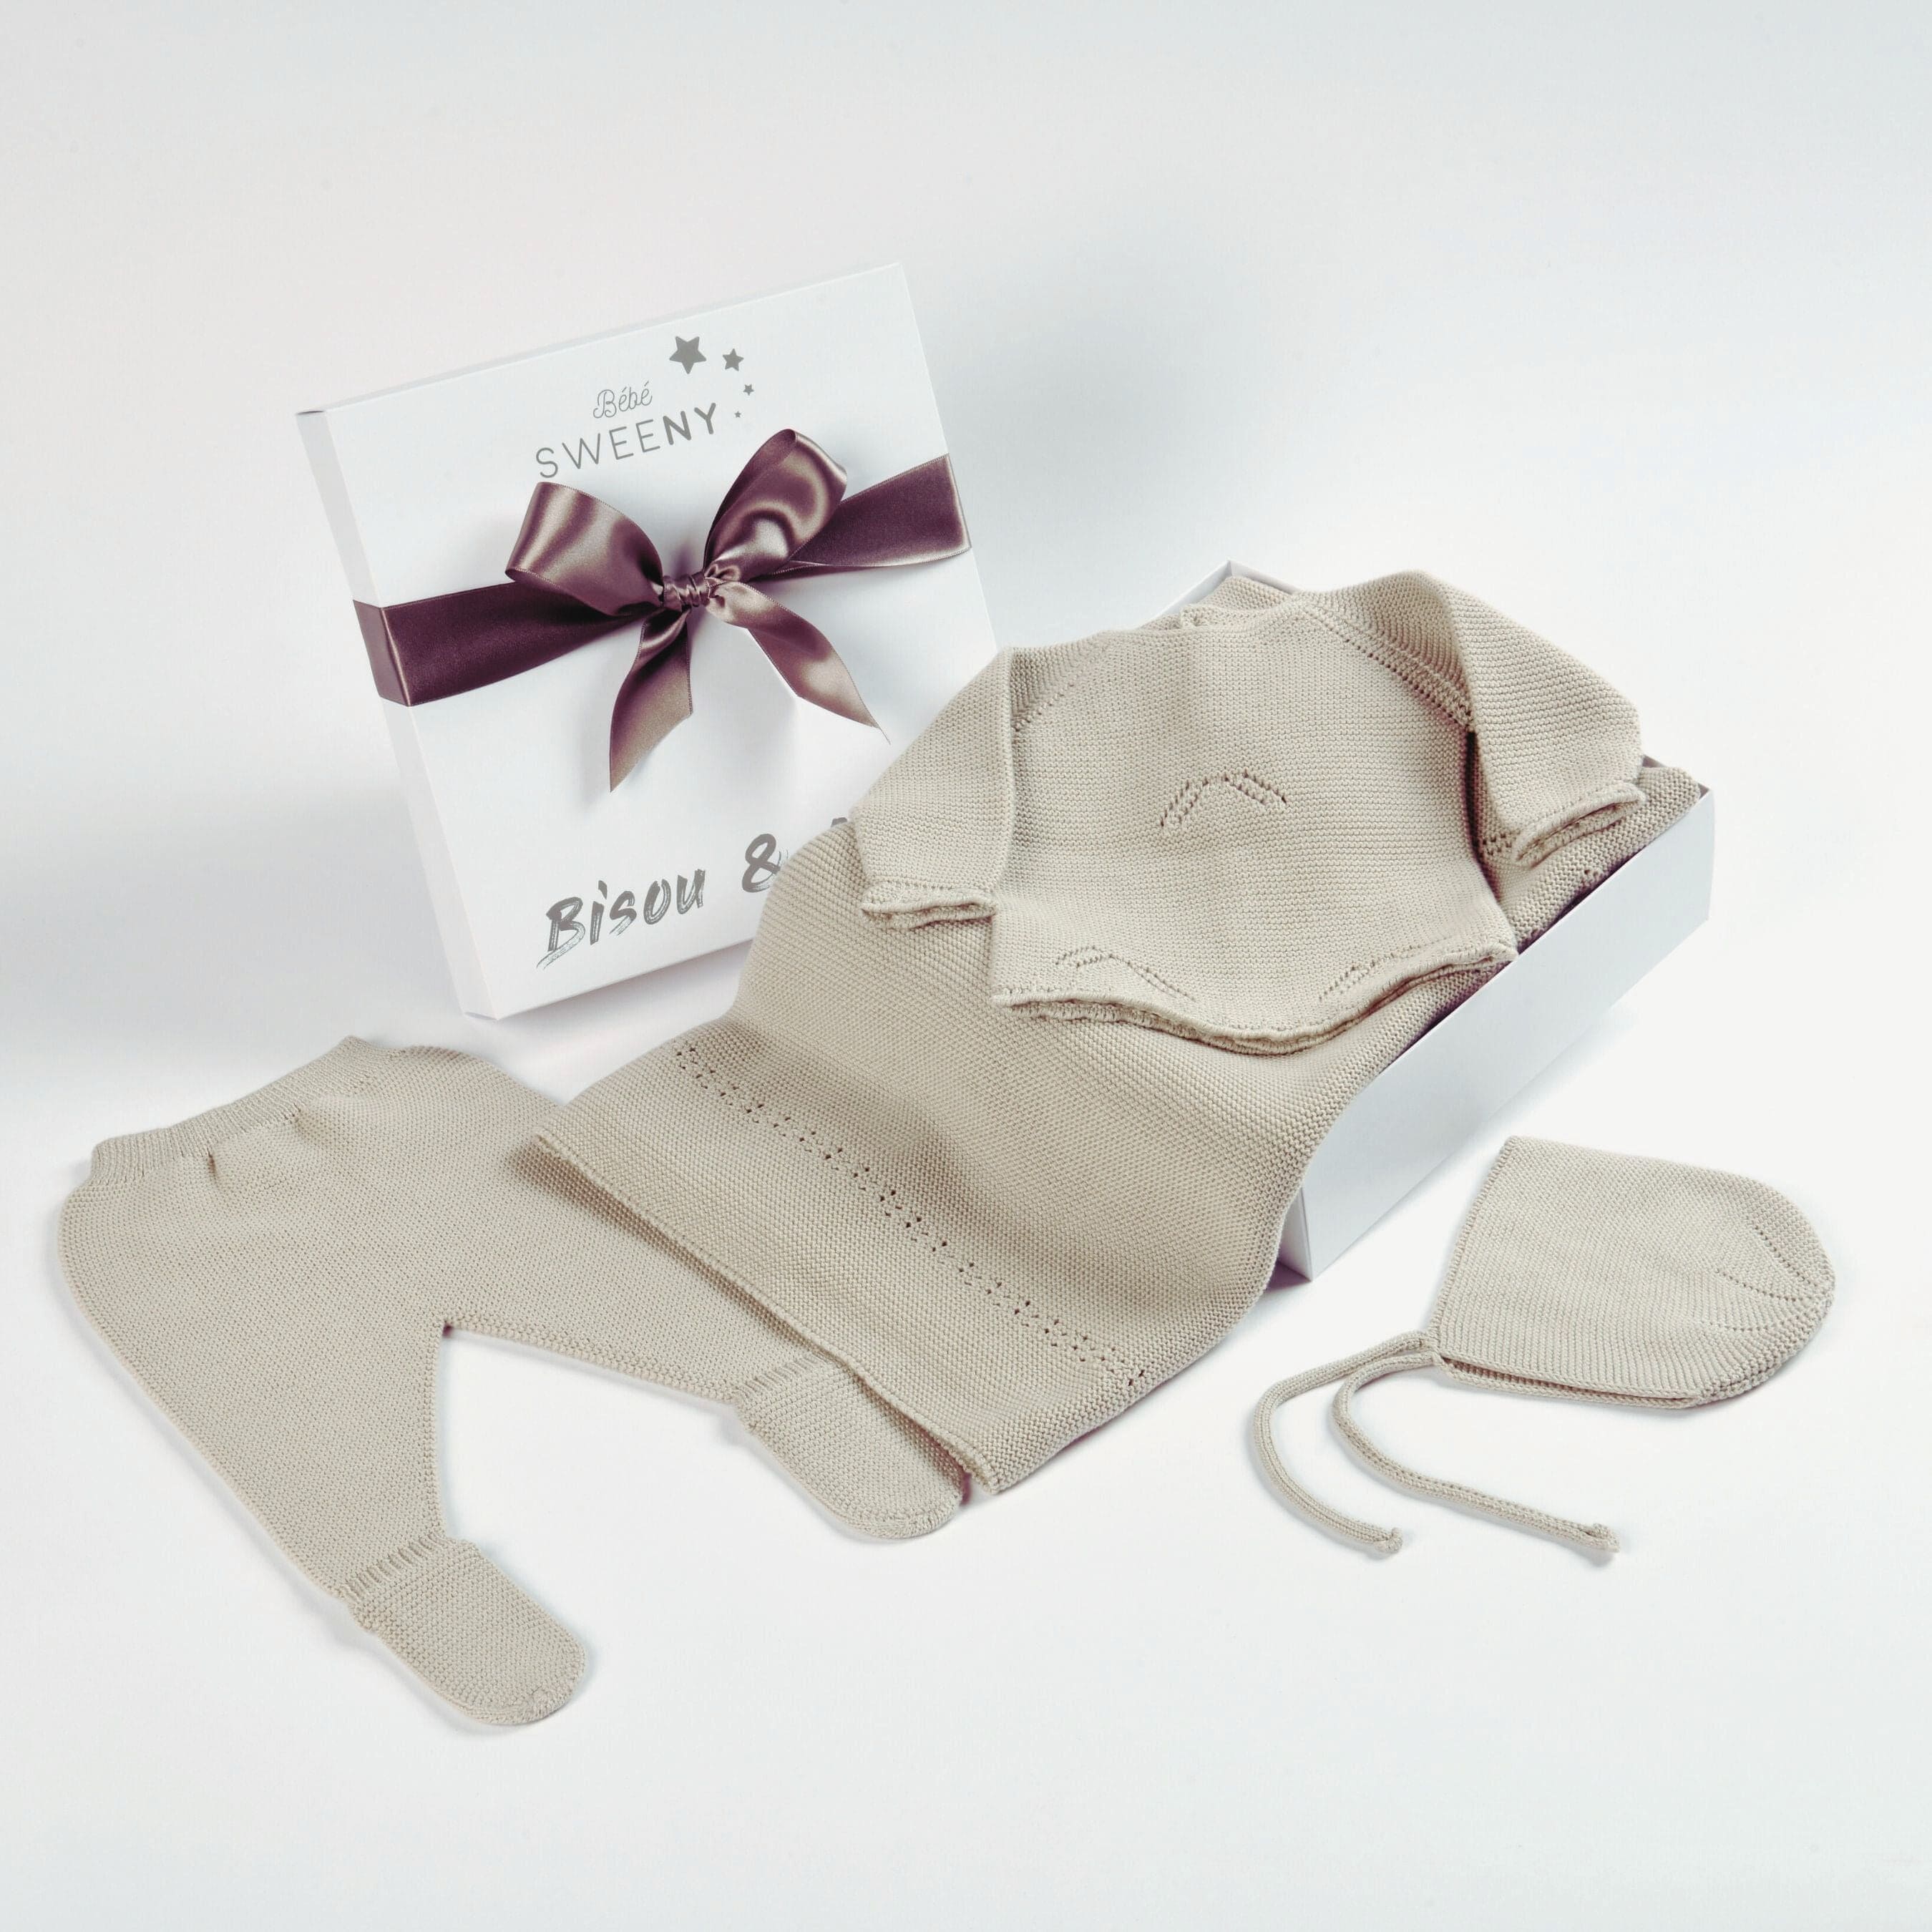 Meli | Baby Taupe Layette Set (4)